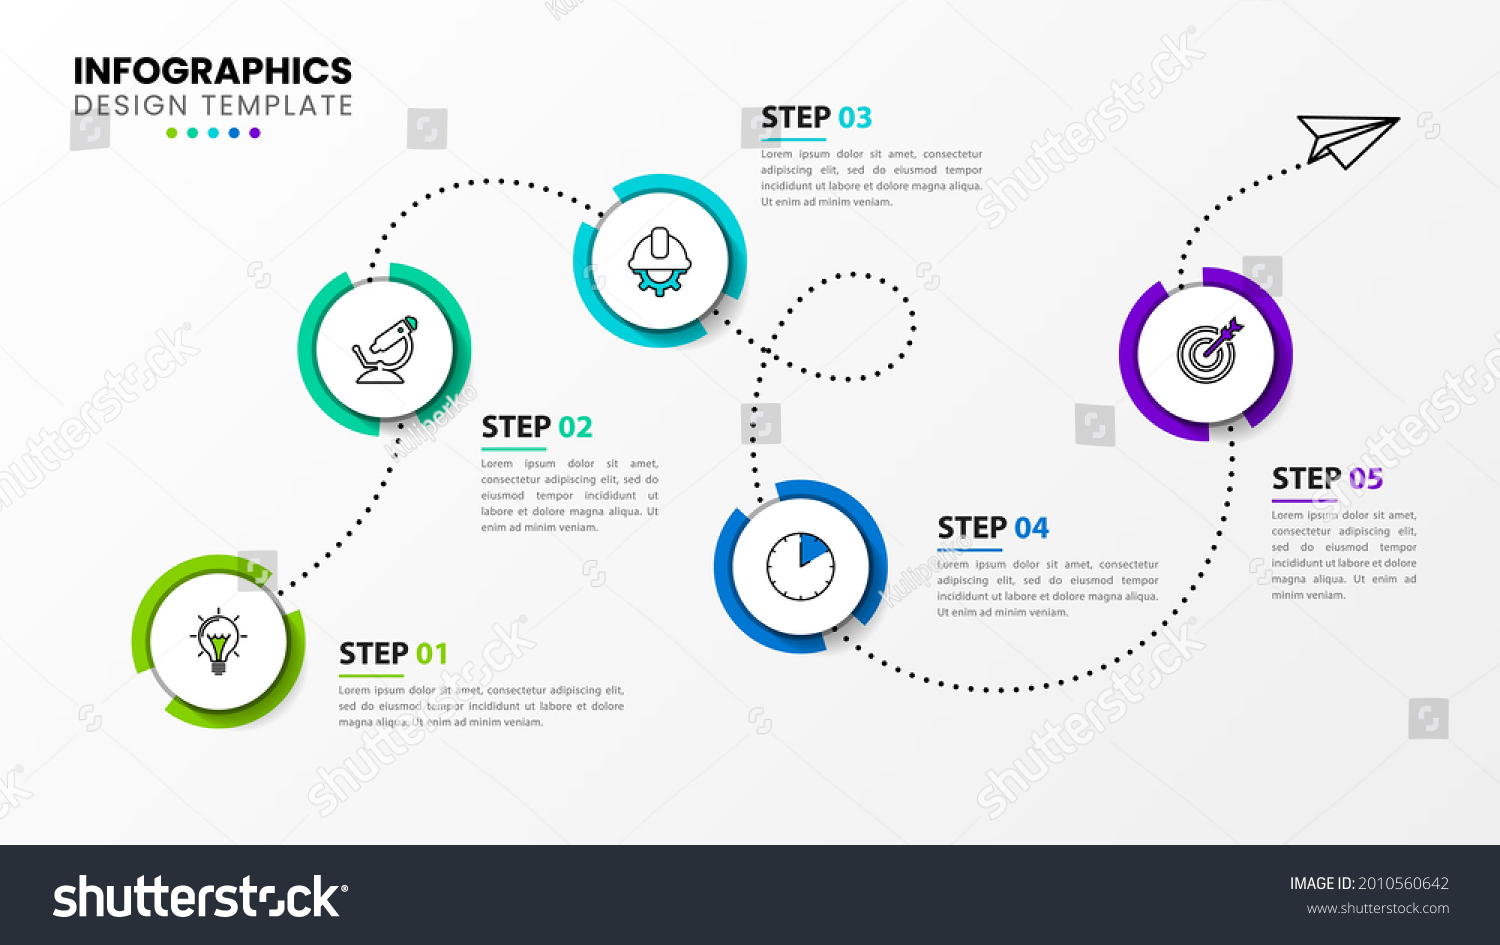 SVG of Infographic design template. Timeline concept with 5 steps. Can be used for workflow layout, diagram, banner, webdesign. Vector illustration svg